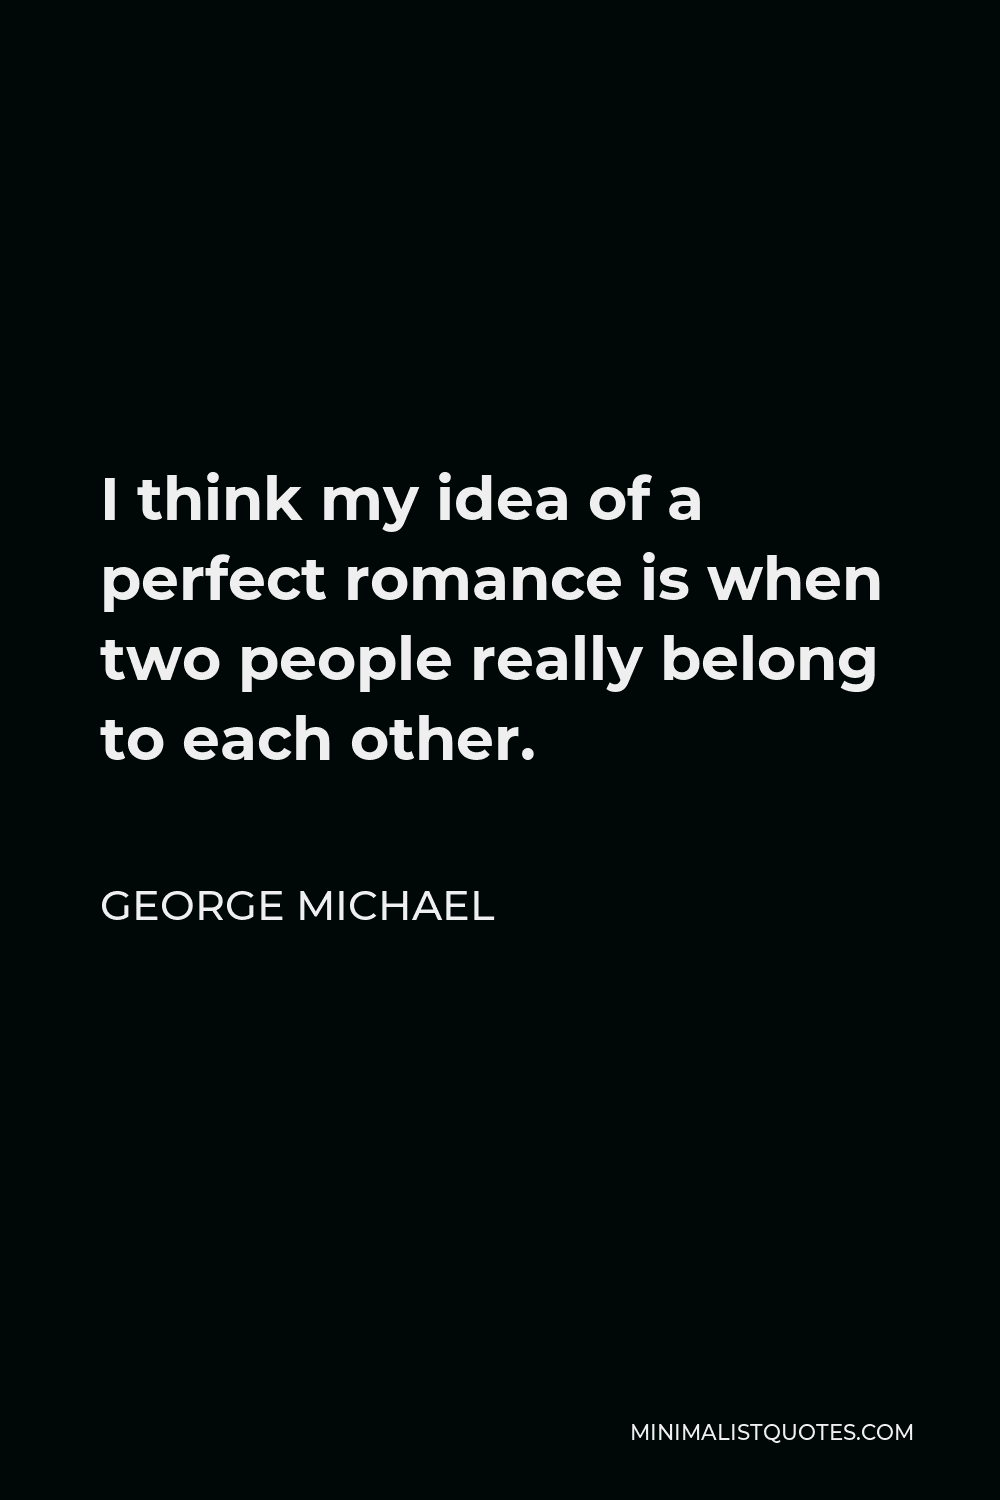 George Michael Quote - I think my idea of a perfect romance is when two people really belong to each other.